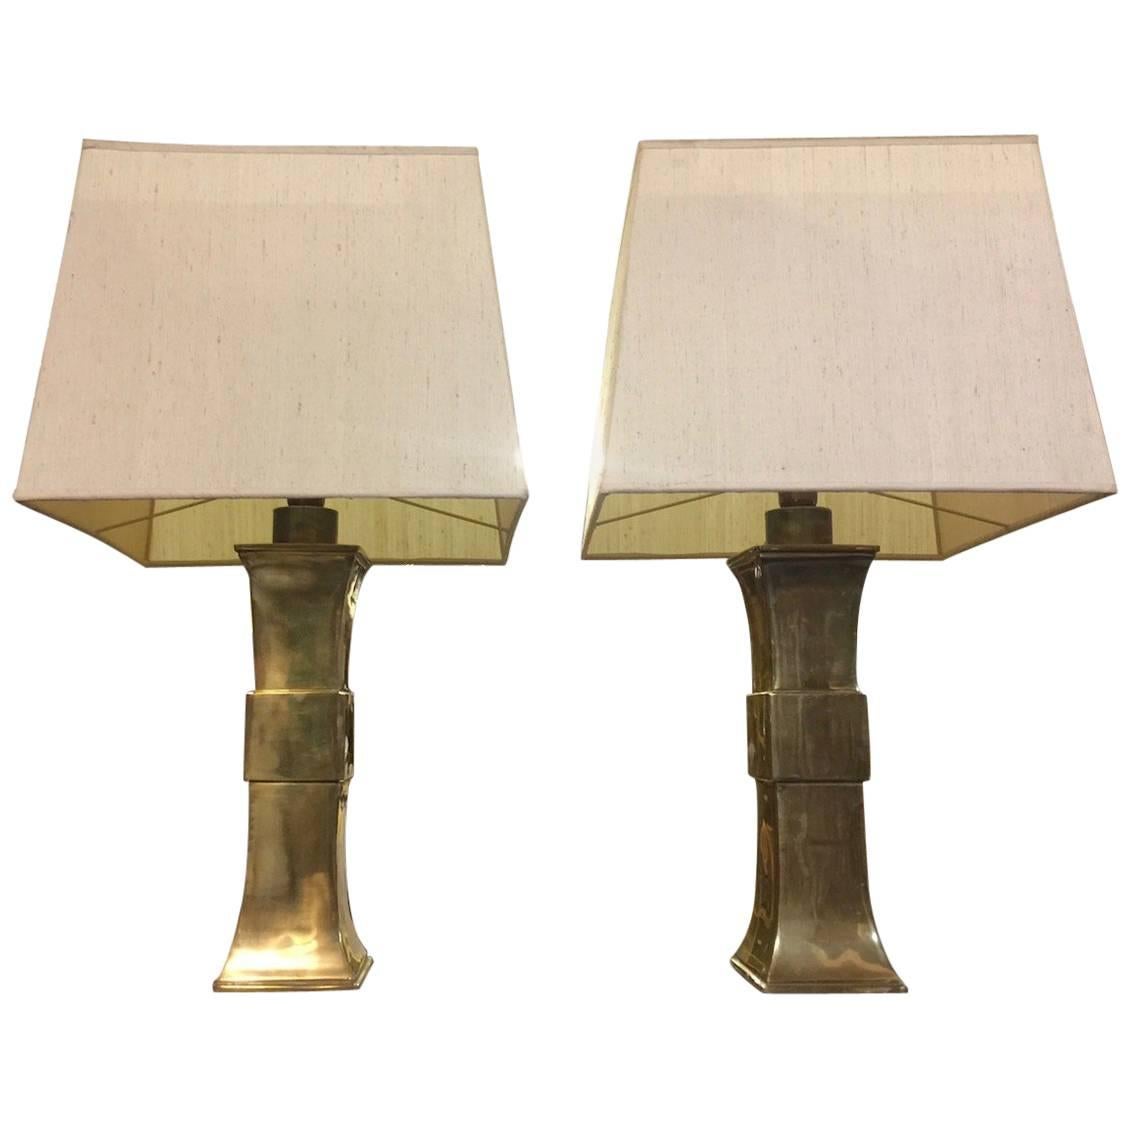 Wonderful French Pair of Huge and Massive Brass Table Lamps with Silk Shades